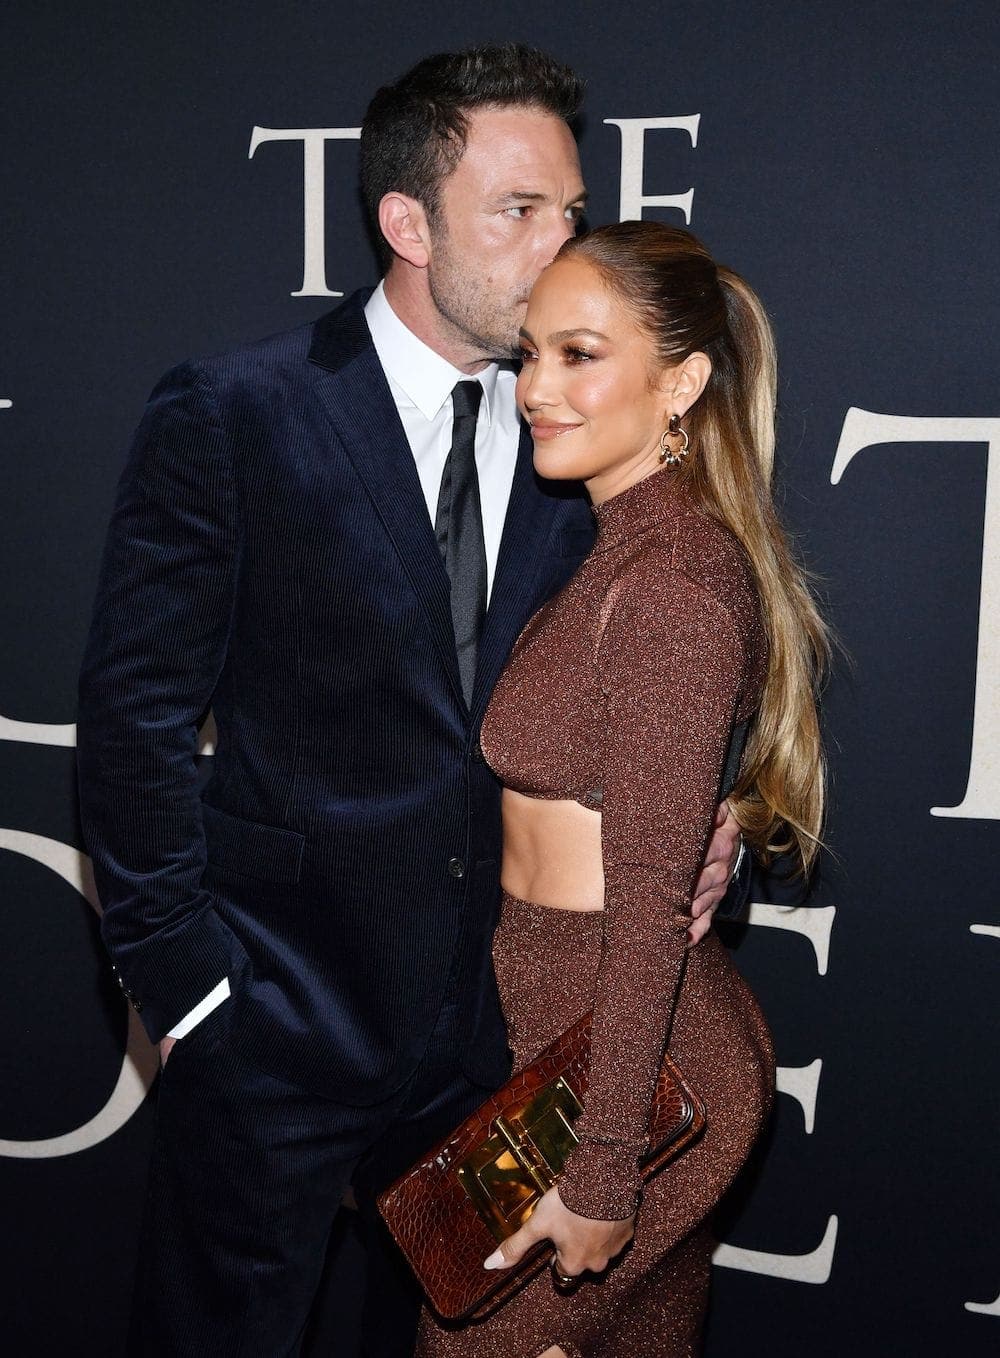 Jennifer Lopez looked stunning in a brown crop top at her beau Ben Affleck's film 'The Last Duel' premiere at the Lincoln Center in New York on October 9, 2021.